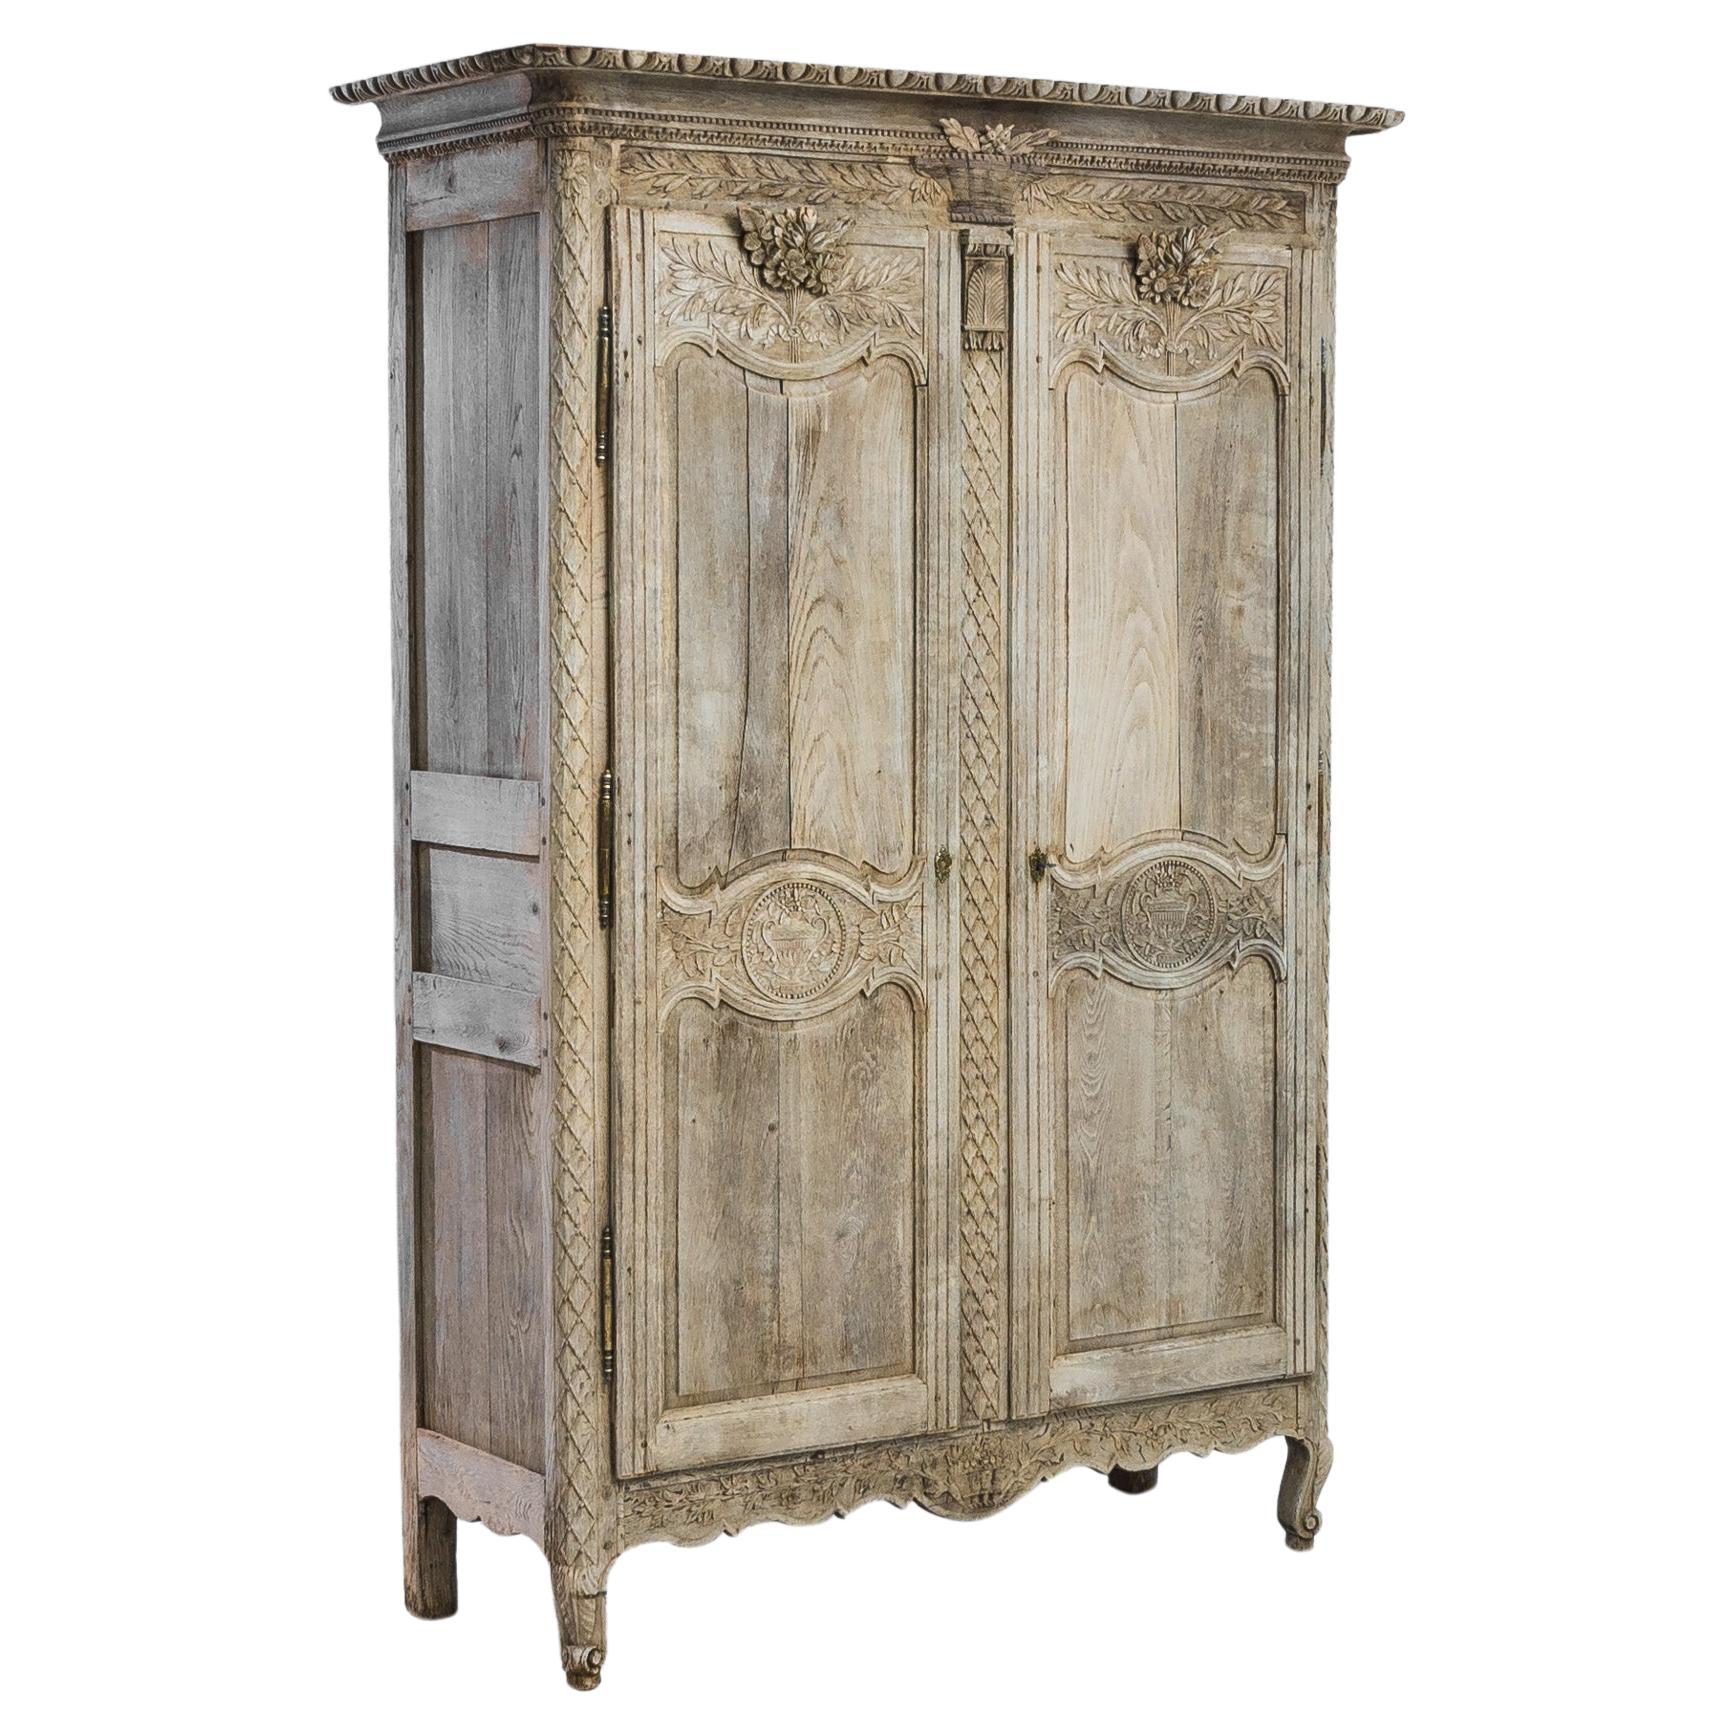 1800s French Bleached Oak Cabinet